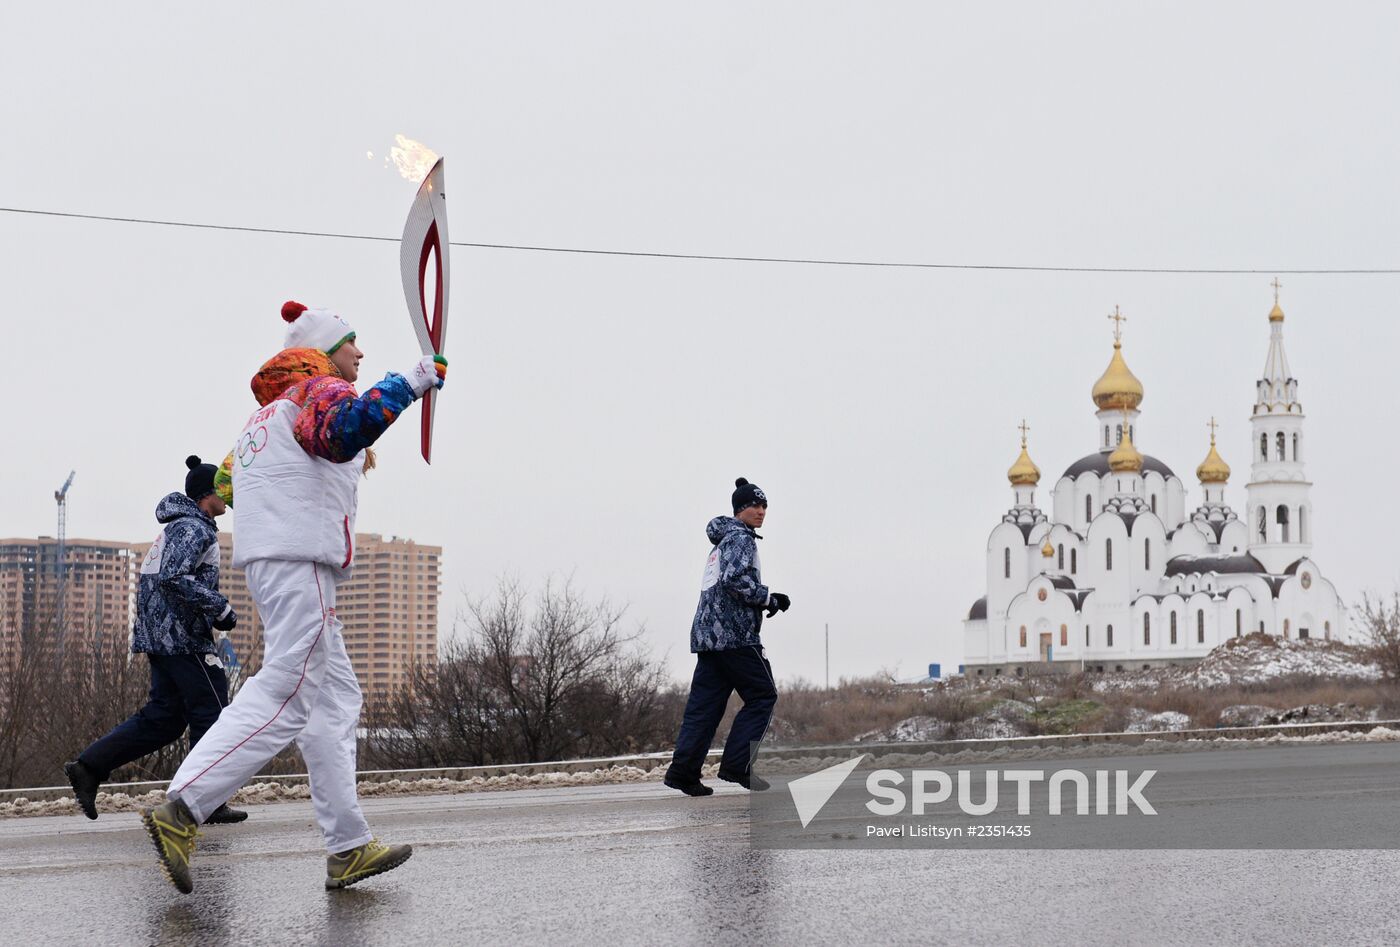 Olympic torch relay. Rostov-on-Don